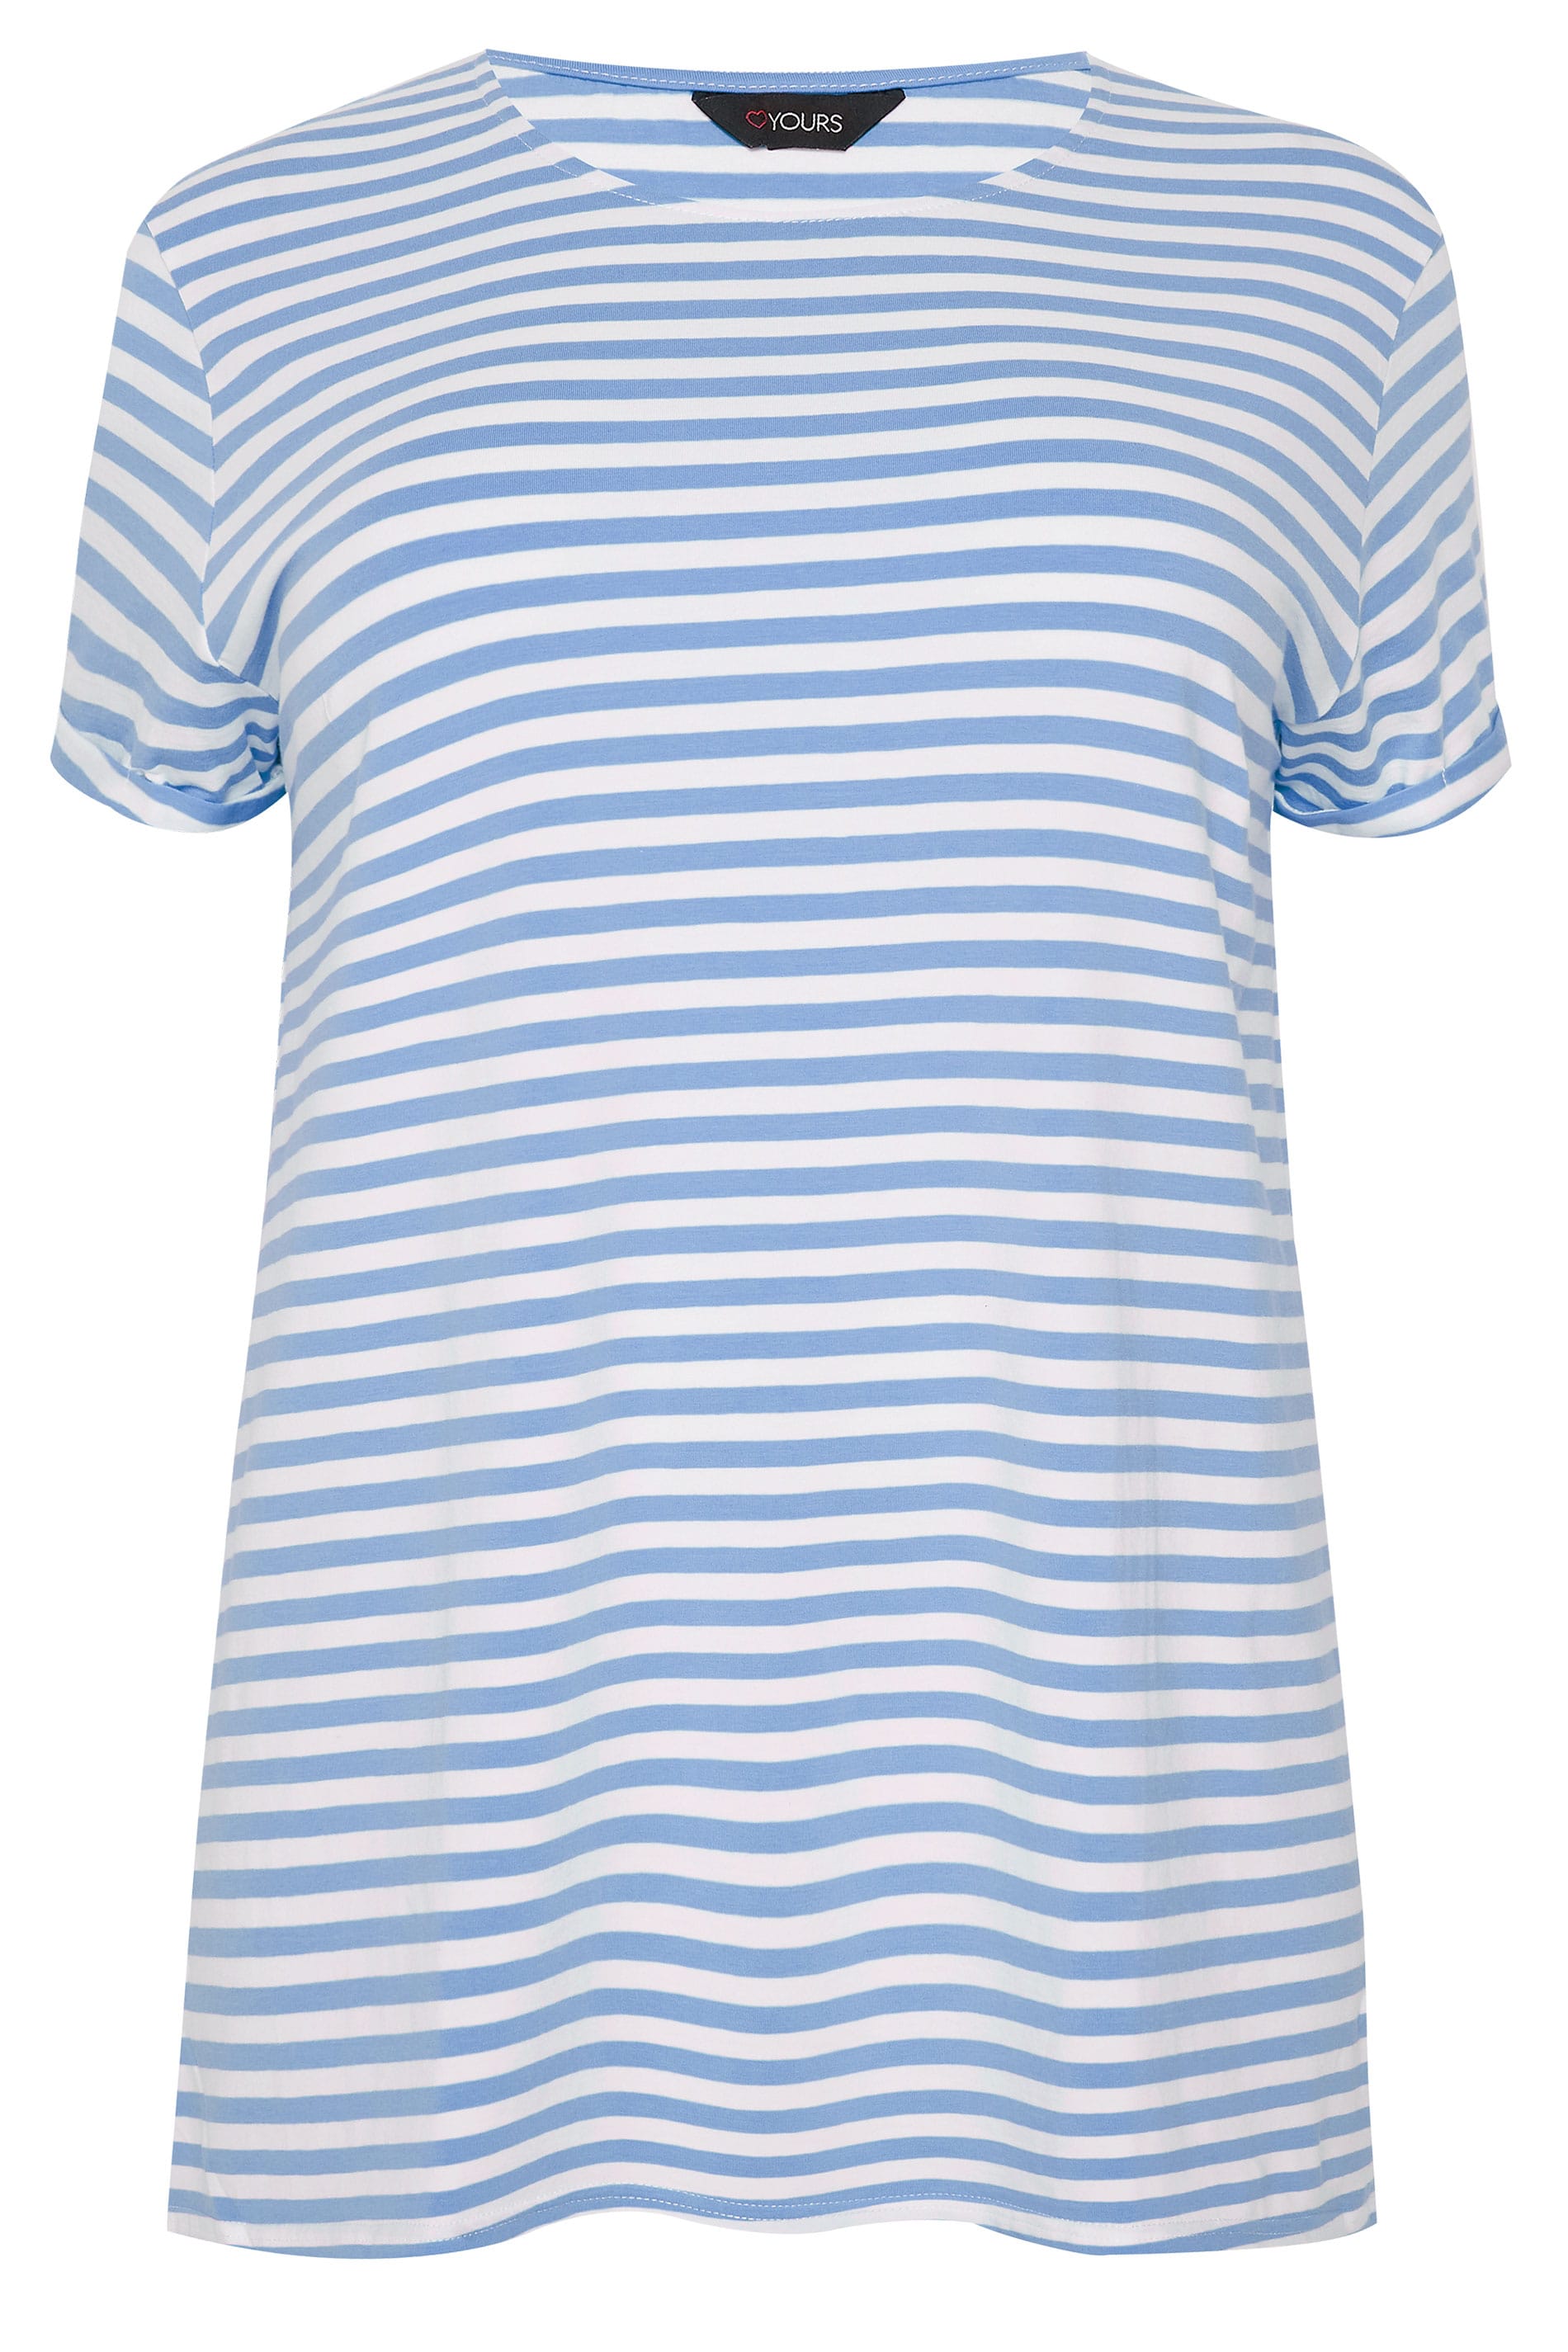 Blue & White Striped T-Shirt | Sizes 16 to 36 | Yours Clothing